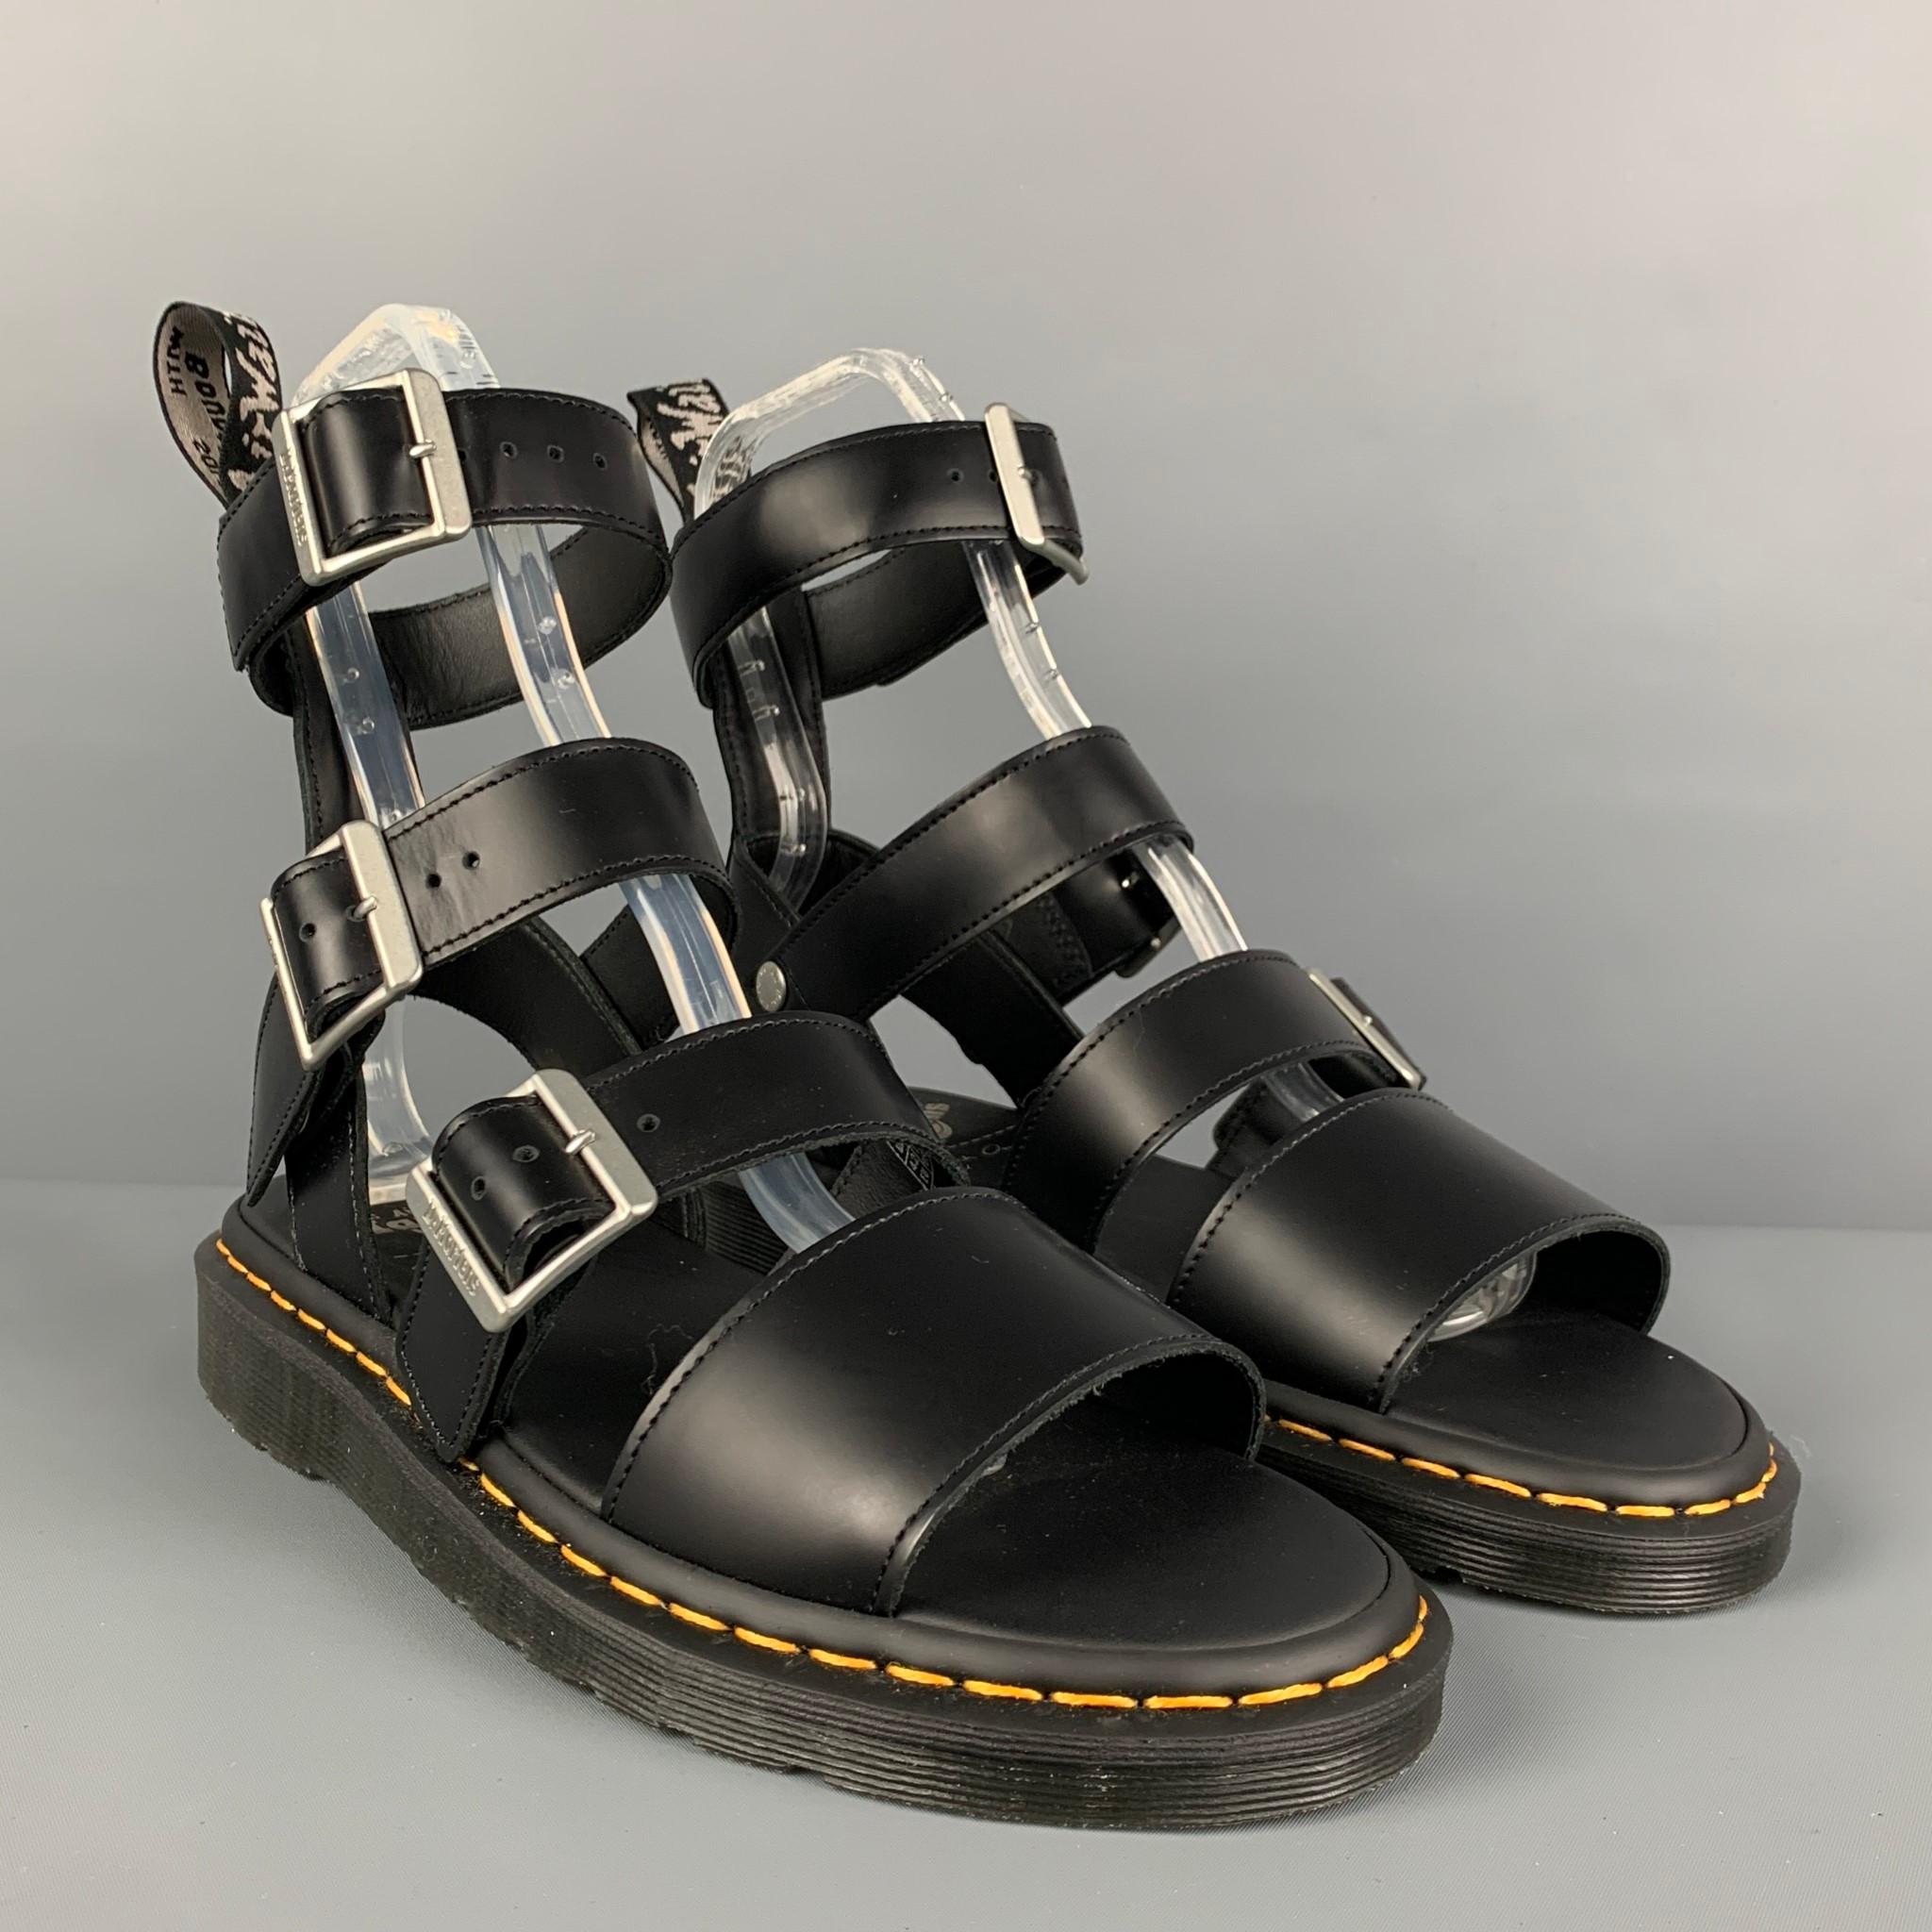 DR.MARTENS x RICK OWENS 'GRYPHON' sandals comes in a black leather featuring a gladiator style, contrast stitching, and a buckle closure. 

New Without Tags.
Marked: 9
Original Retail Price: $392.00

Outsole: 11.25 in. x 4.5 in. 